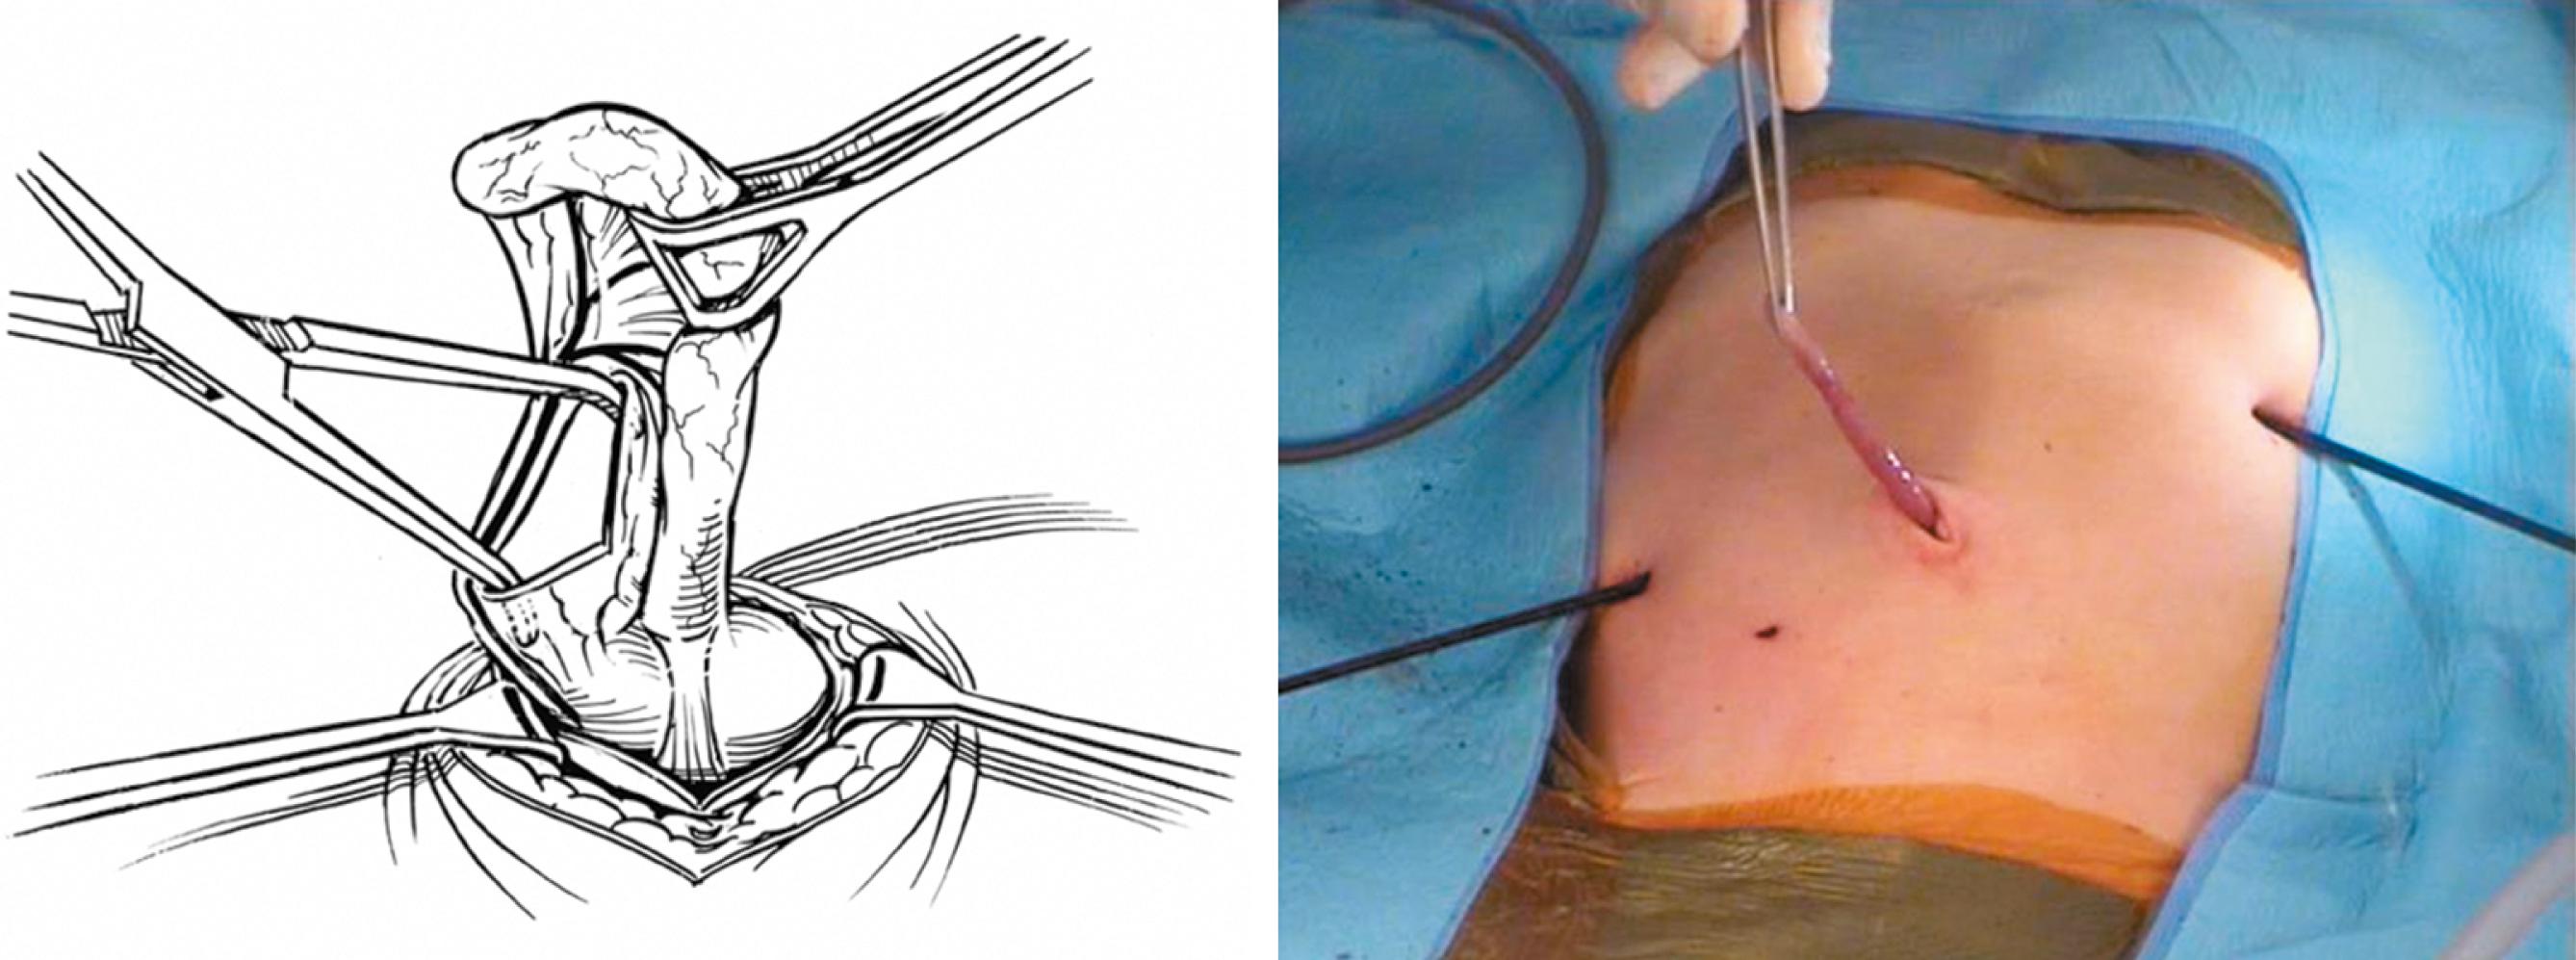 Fig. 7-9, Extracorporeal appendectomy is possible and eliminates the need for a large port for the endoscopic stapler. The appendix is grasped with one of the intracorporeal instruments and brought into view through the umbilical fascial defect, where it is grasped and exteriorized, and an extracorporeal appendectomy is performed.